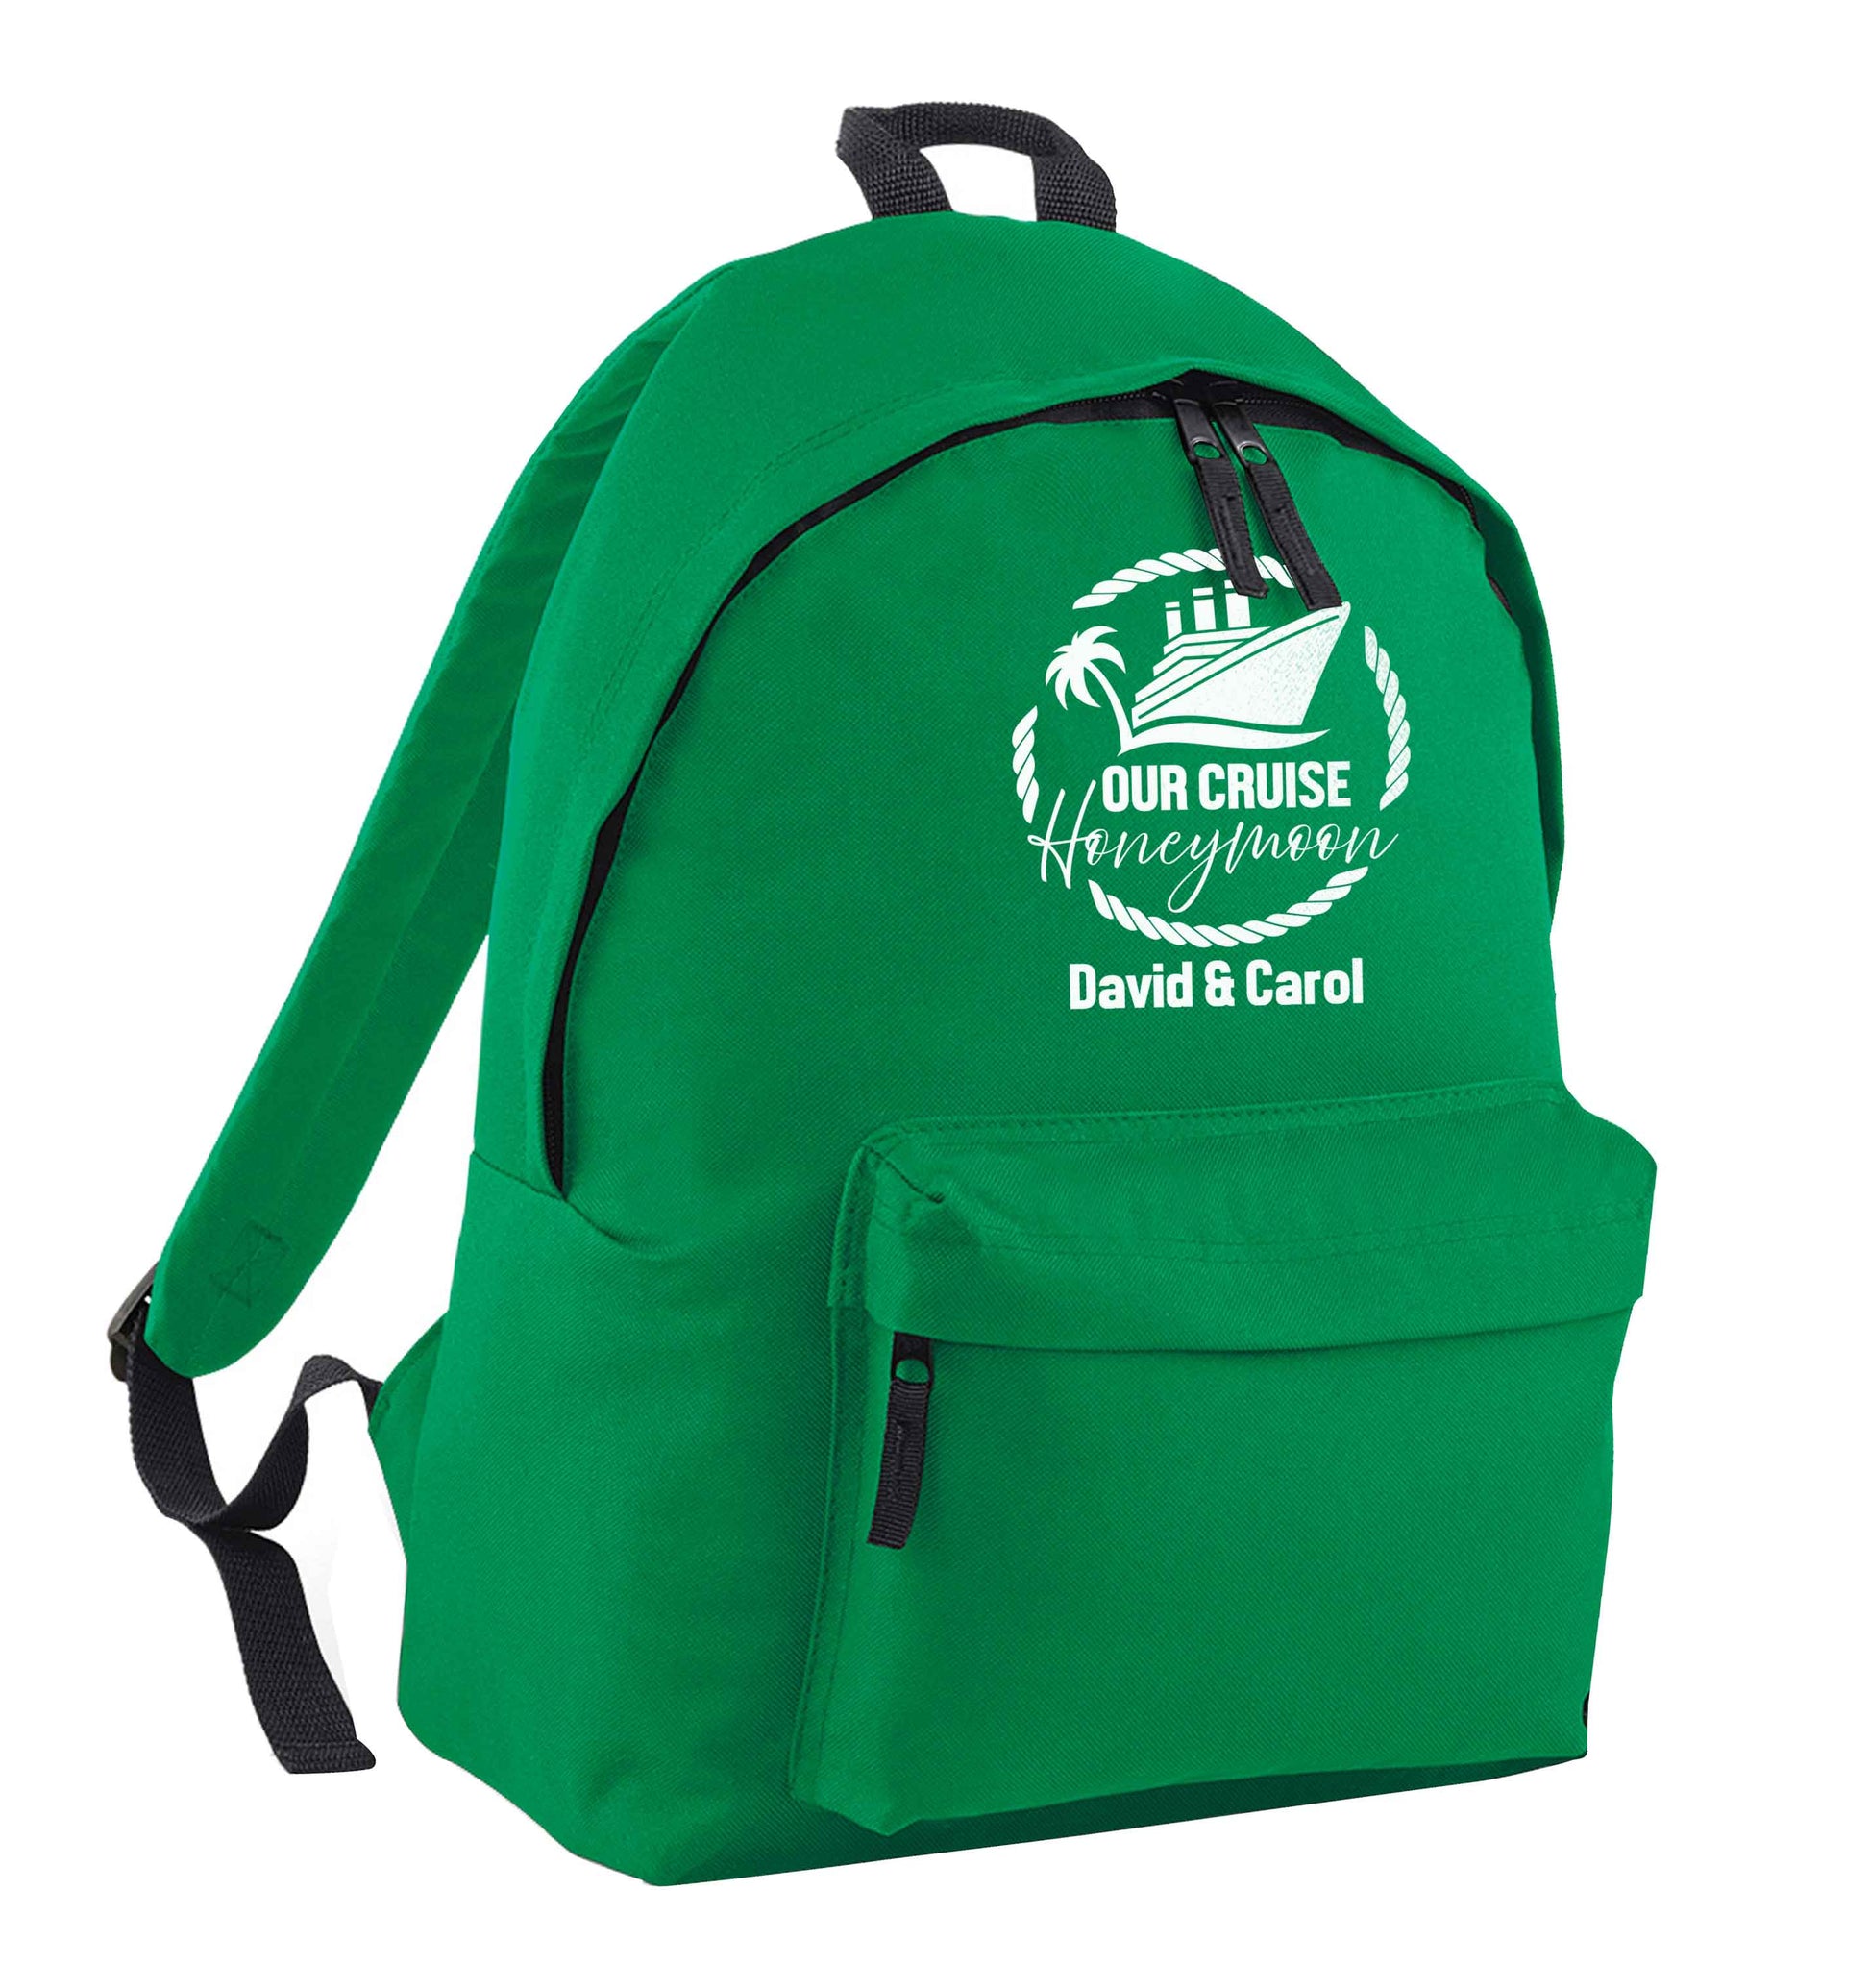 Our cruise honeymoon personalised green adults backpack